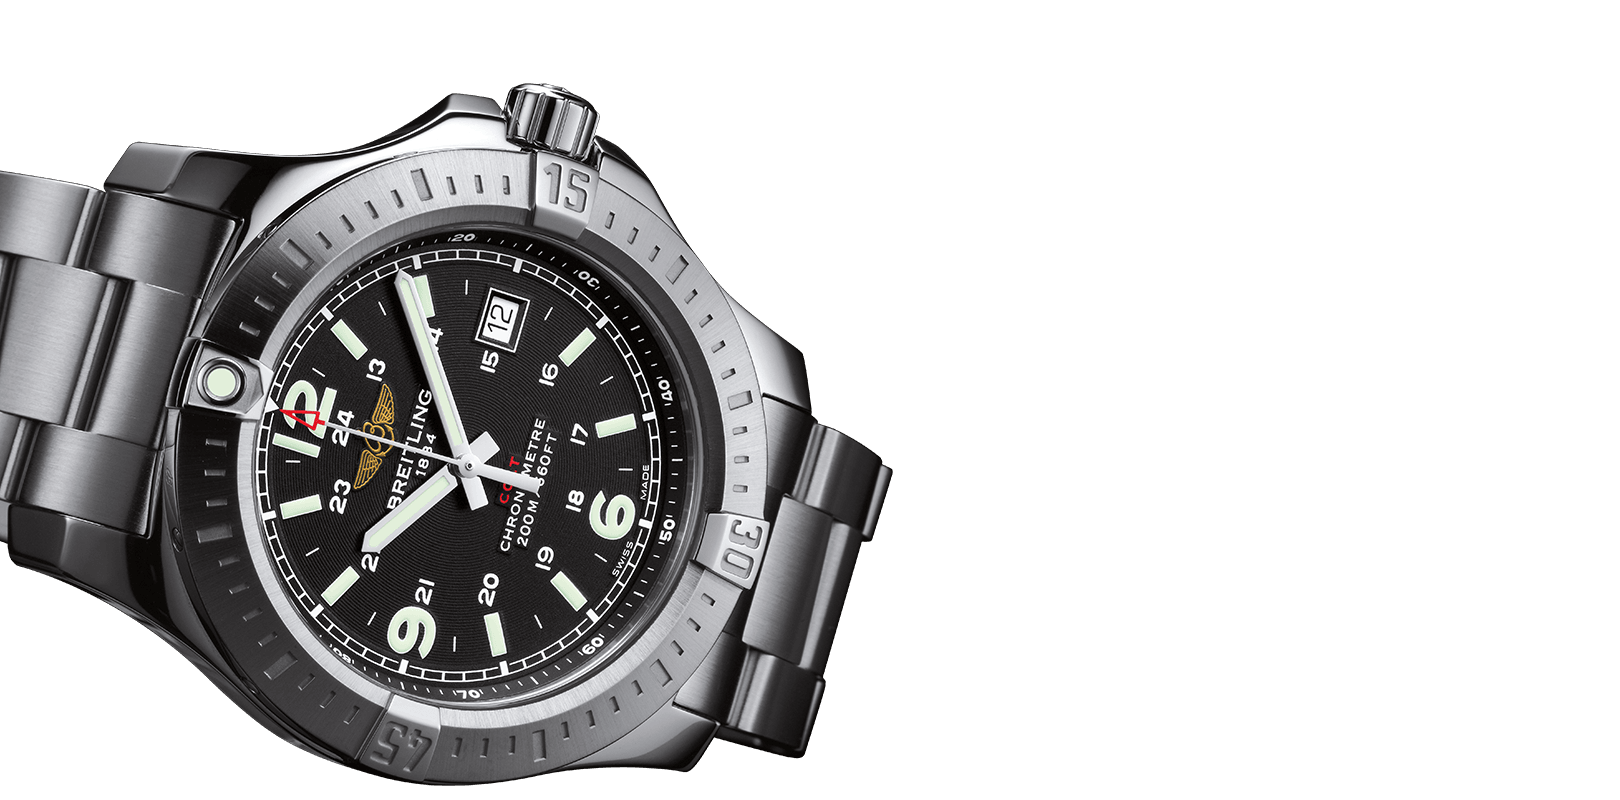 The breitling Avengers chronograph black dials 43 mm